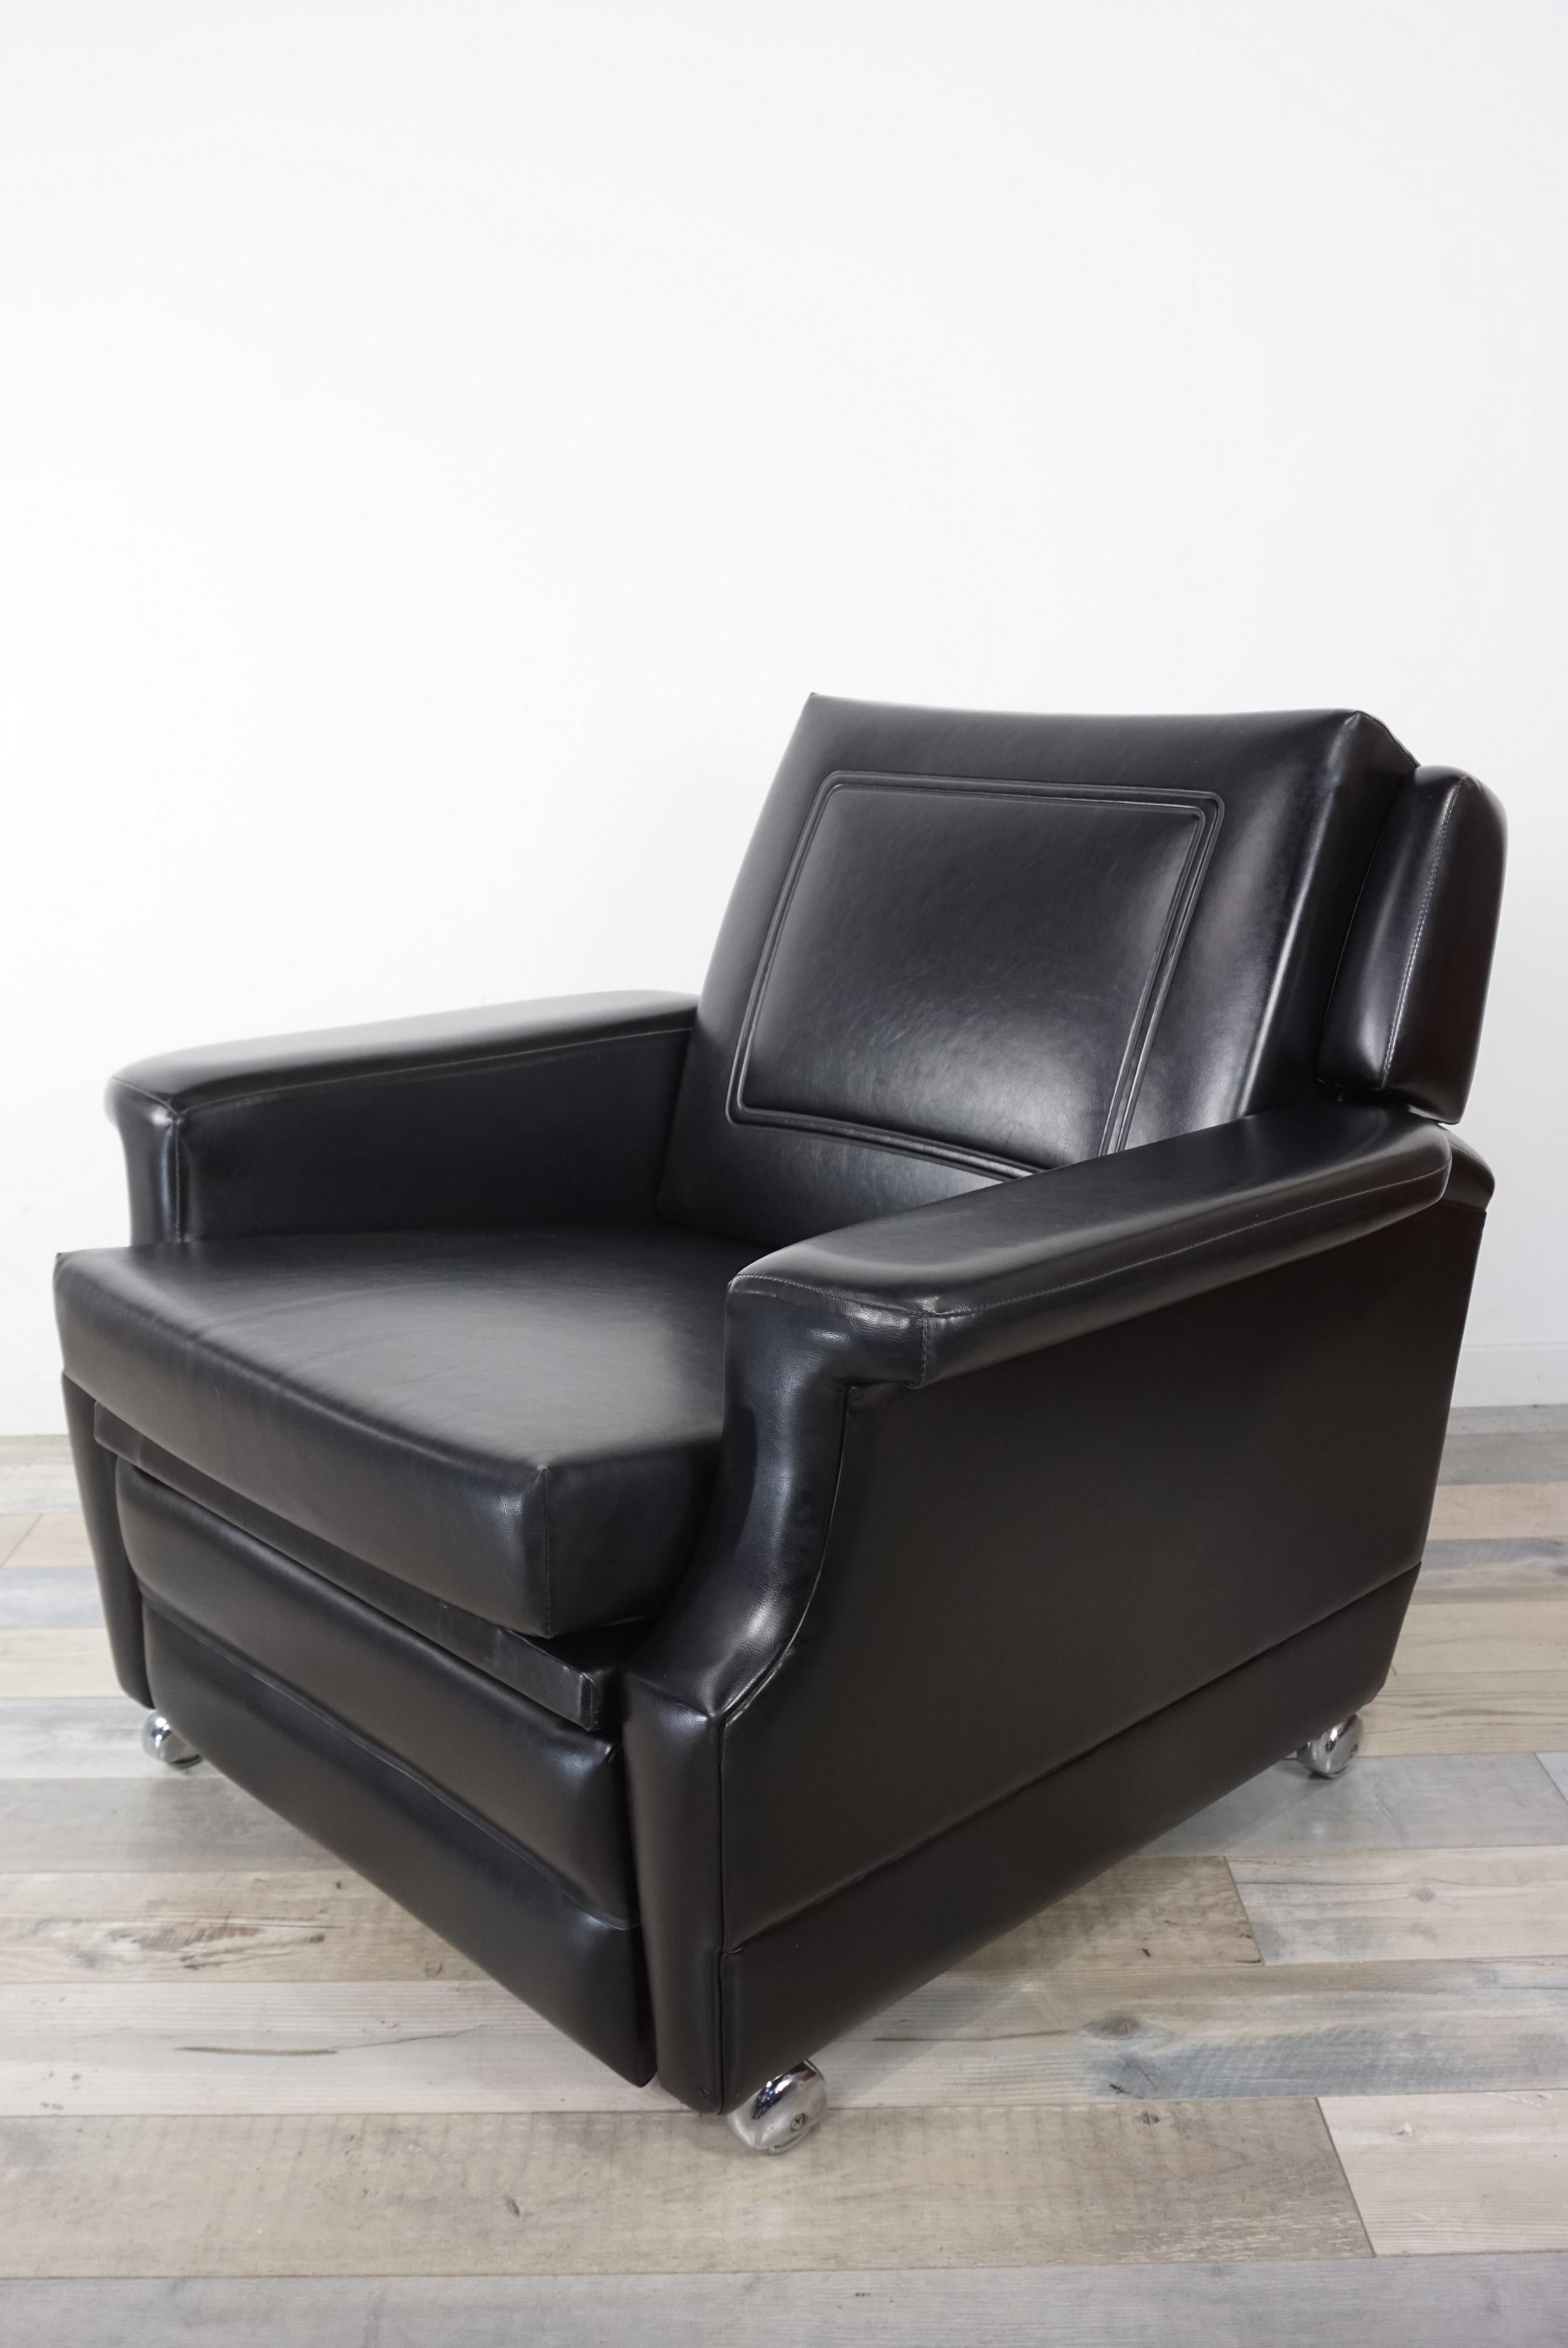 1950s French Design recliner and relax black faux leather armchair 

1950s design relax armchair in black faux-leather of good quality. Such amazing by hiding a headrest in his back and a footrest under his seat. It passes in the blink of an eye